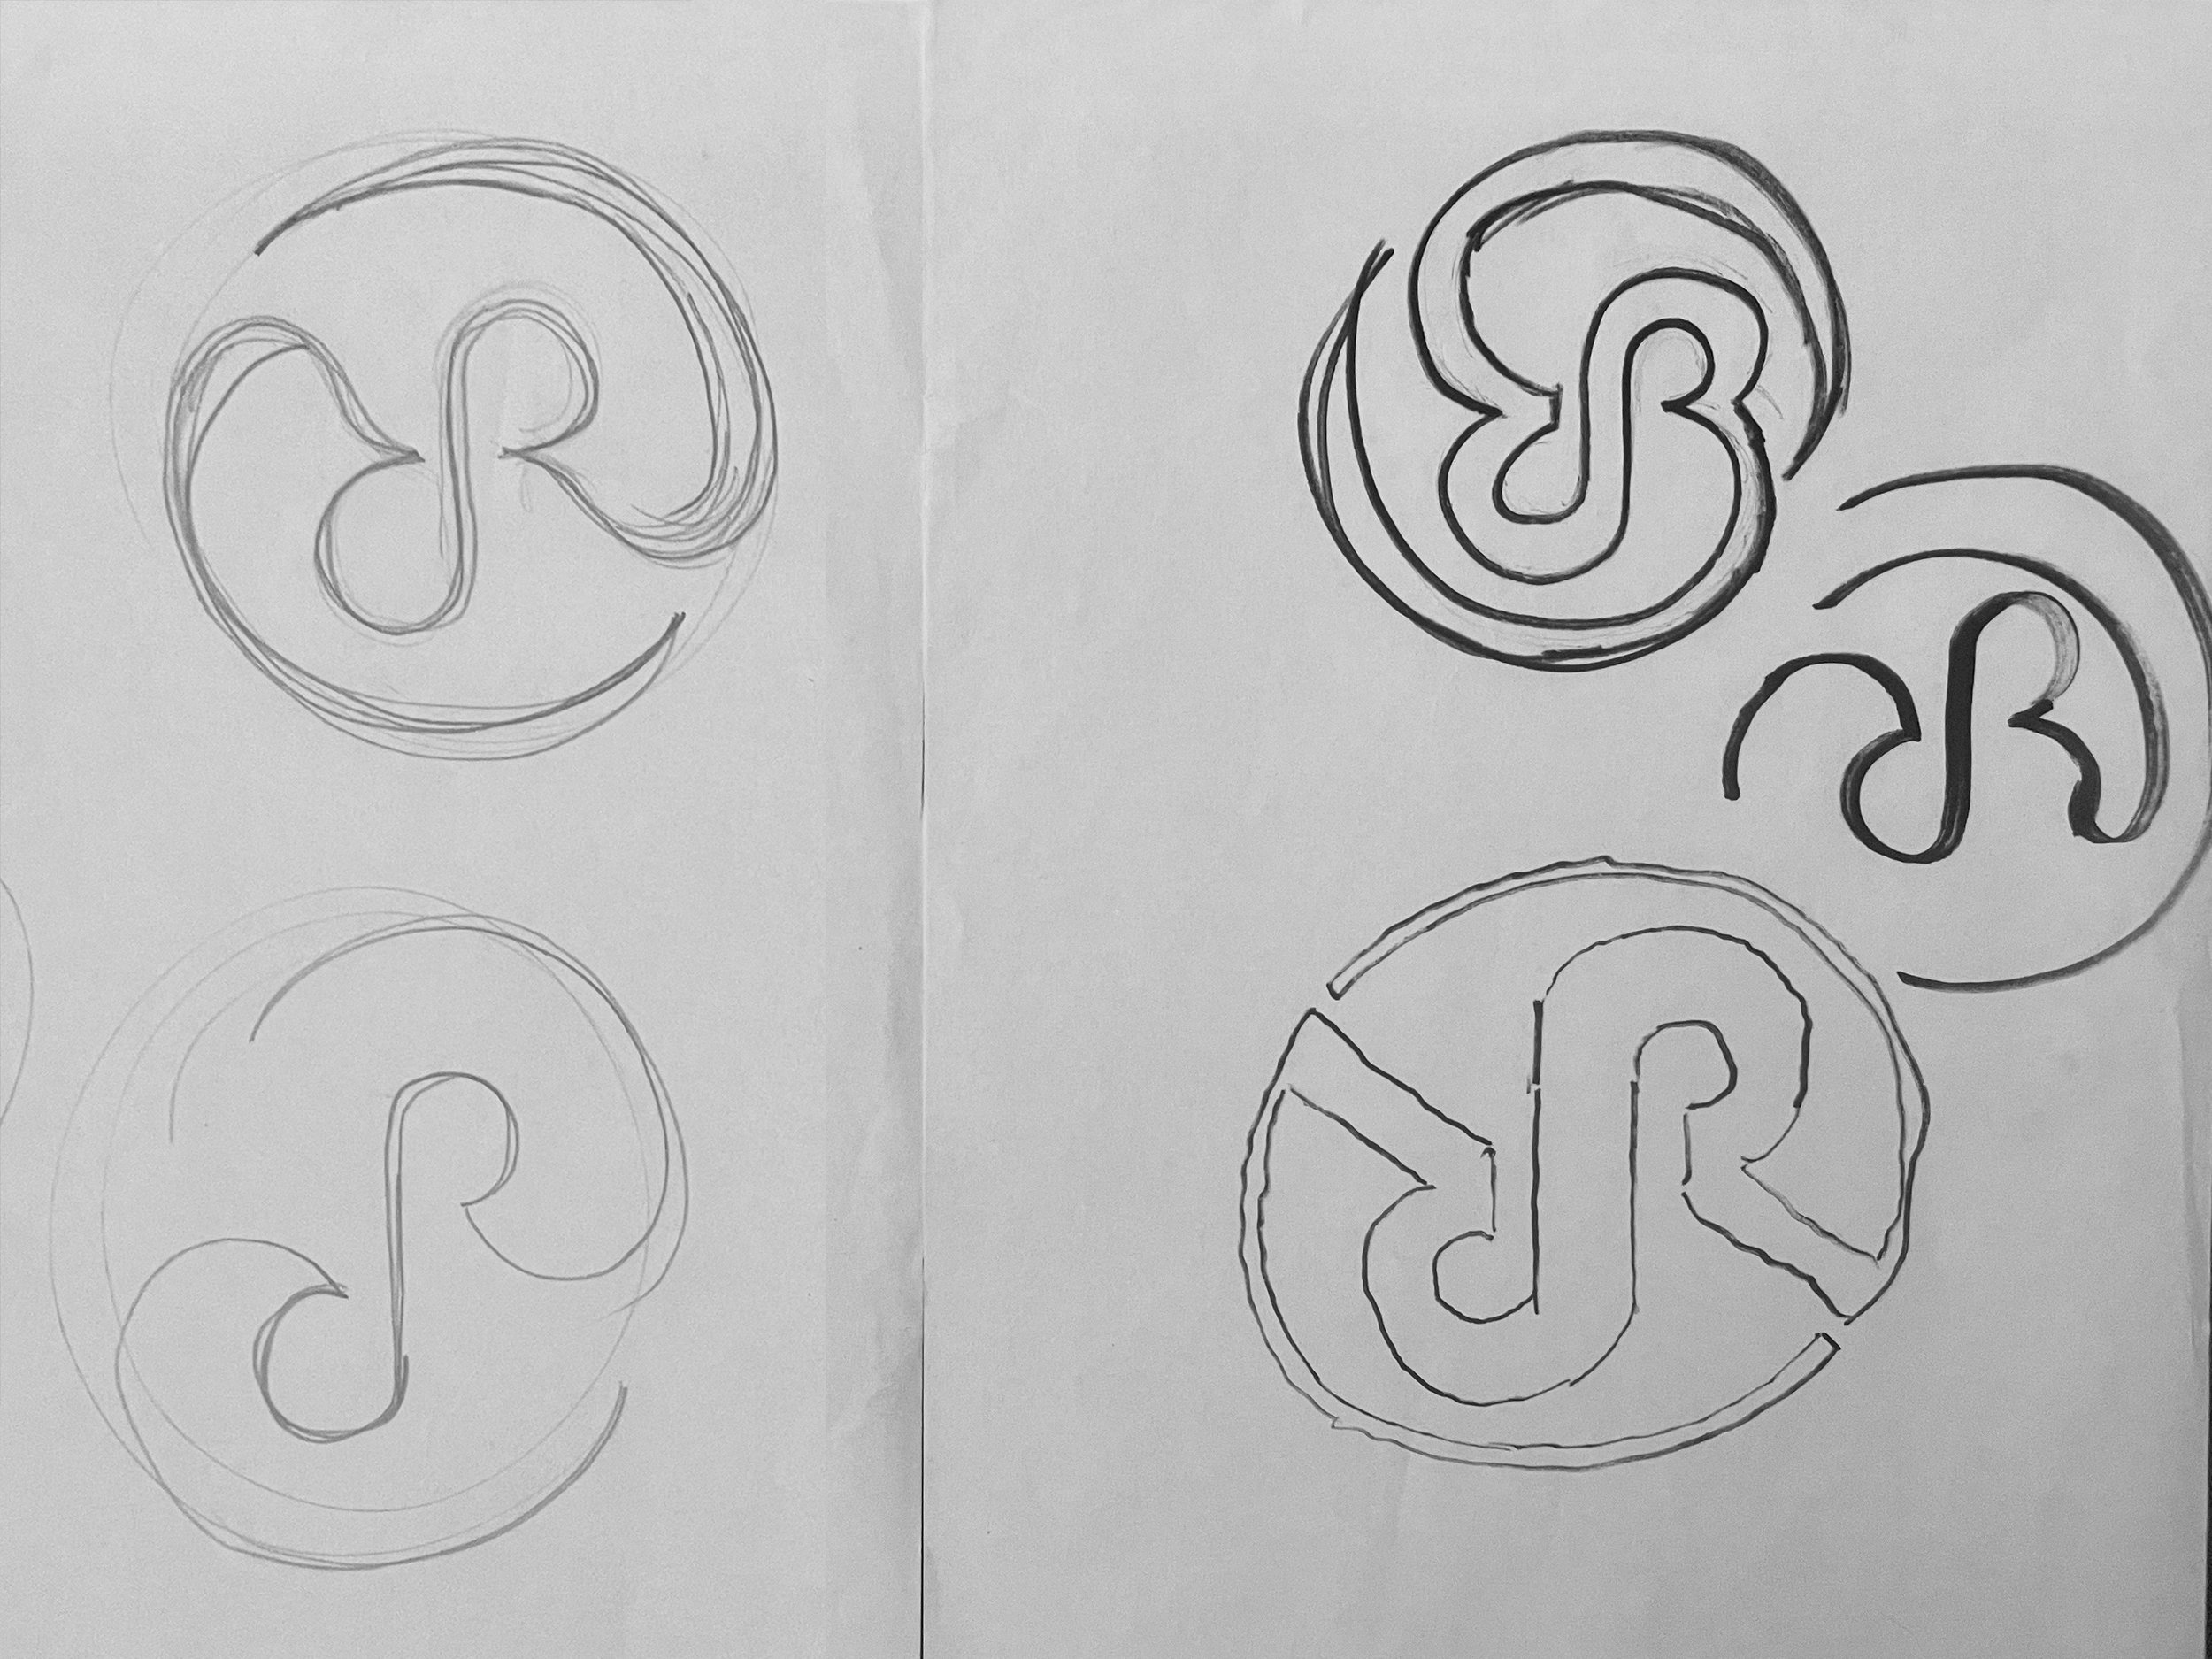 Mat's band mate's logo ideations (2005)